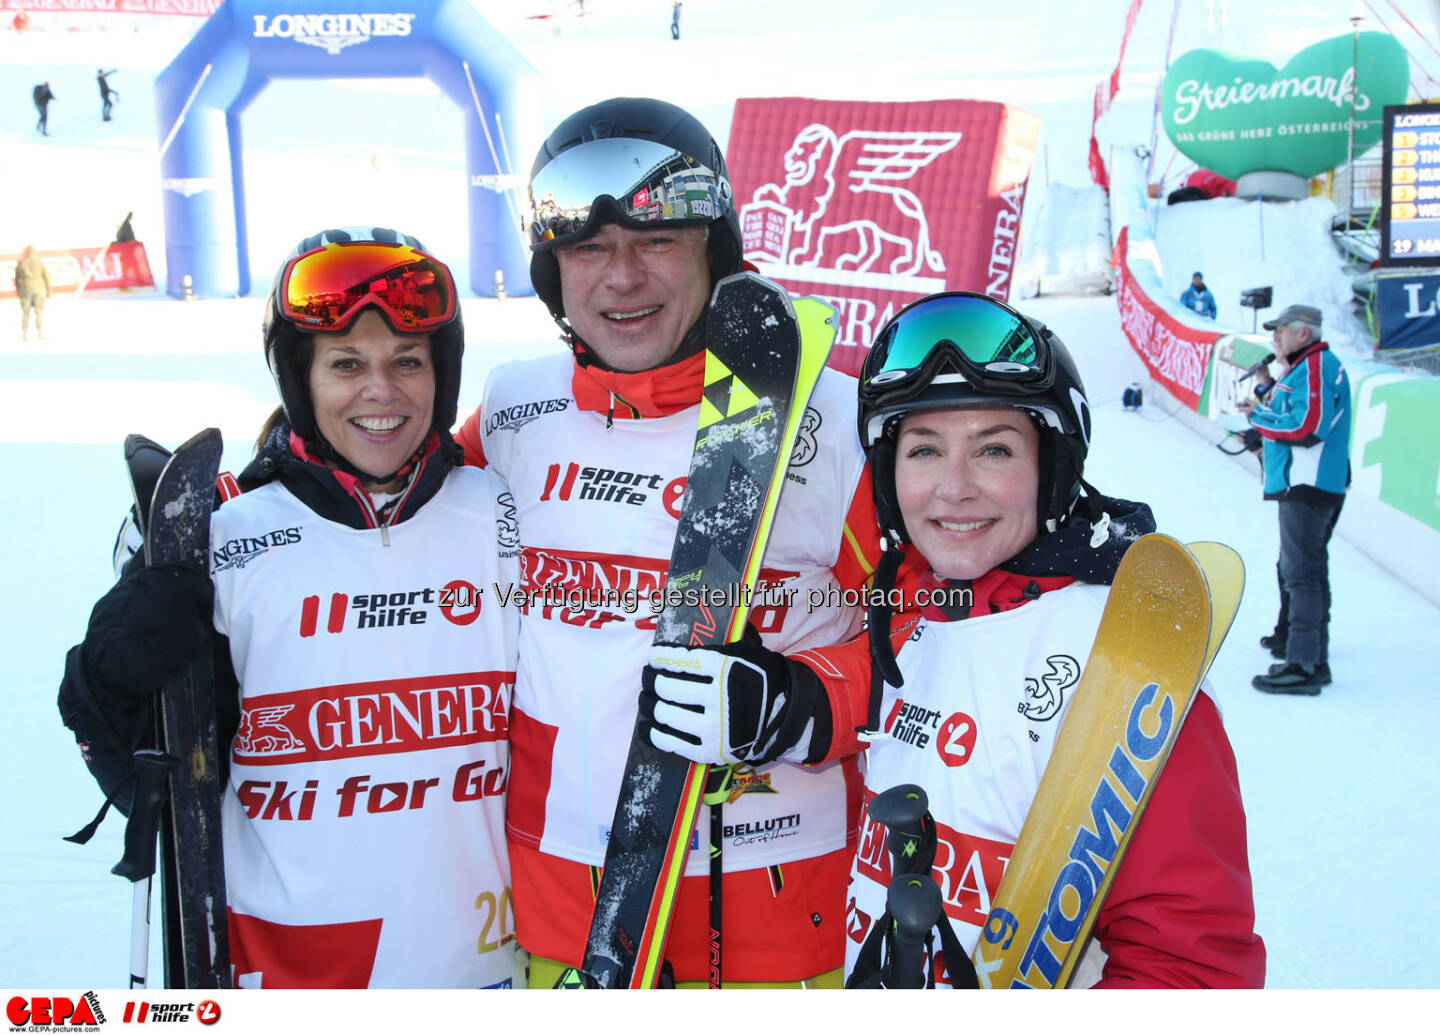 Ski for Gold Charity Race. Image shows Vera Russwurm, Toni Polster and Marisa Burger. Photo: GEPA pictures/ Harald Steiner